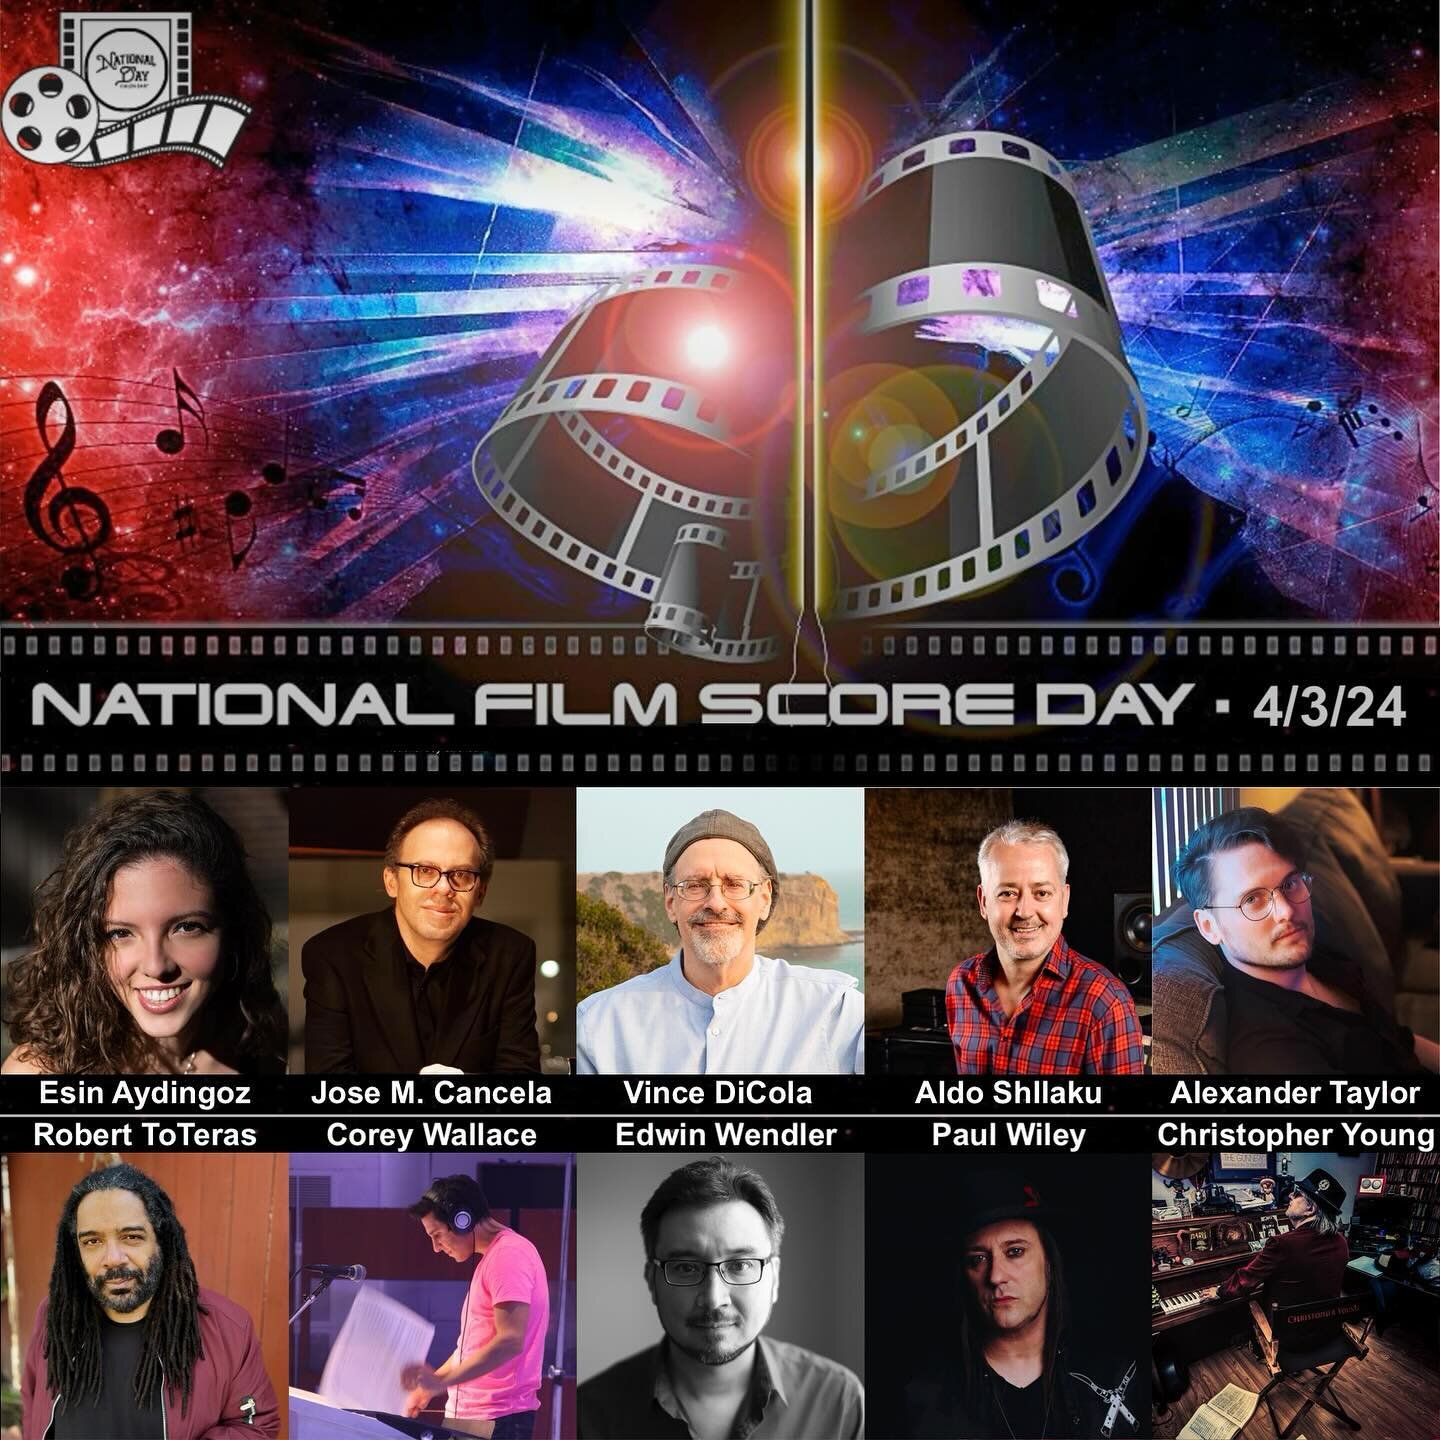 Happy National Film Score Day! Great film/TV/new media music is what we love and we're honored to rep some of the best in the business! Go listen to some of their music on your favorite platform today!
*
*
*
#NationalFilmScoreDay #christopheryoung #a